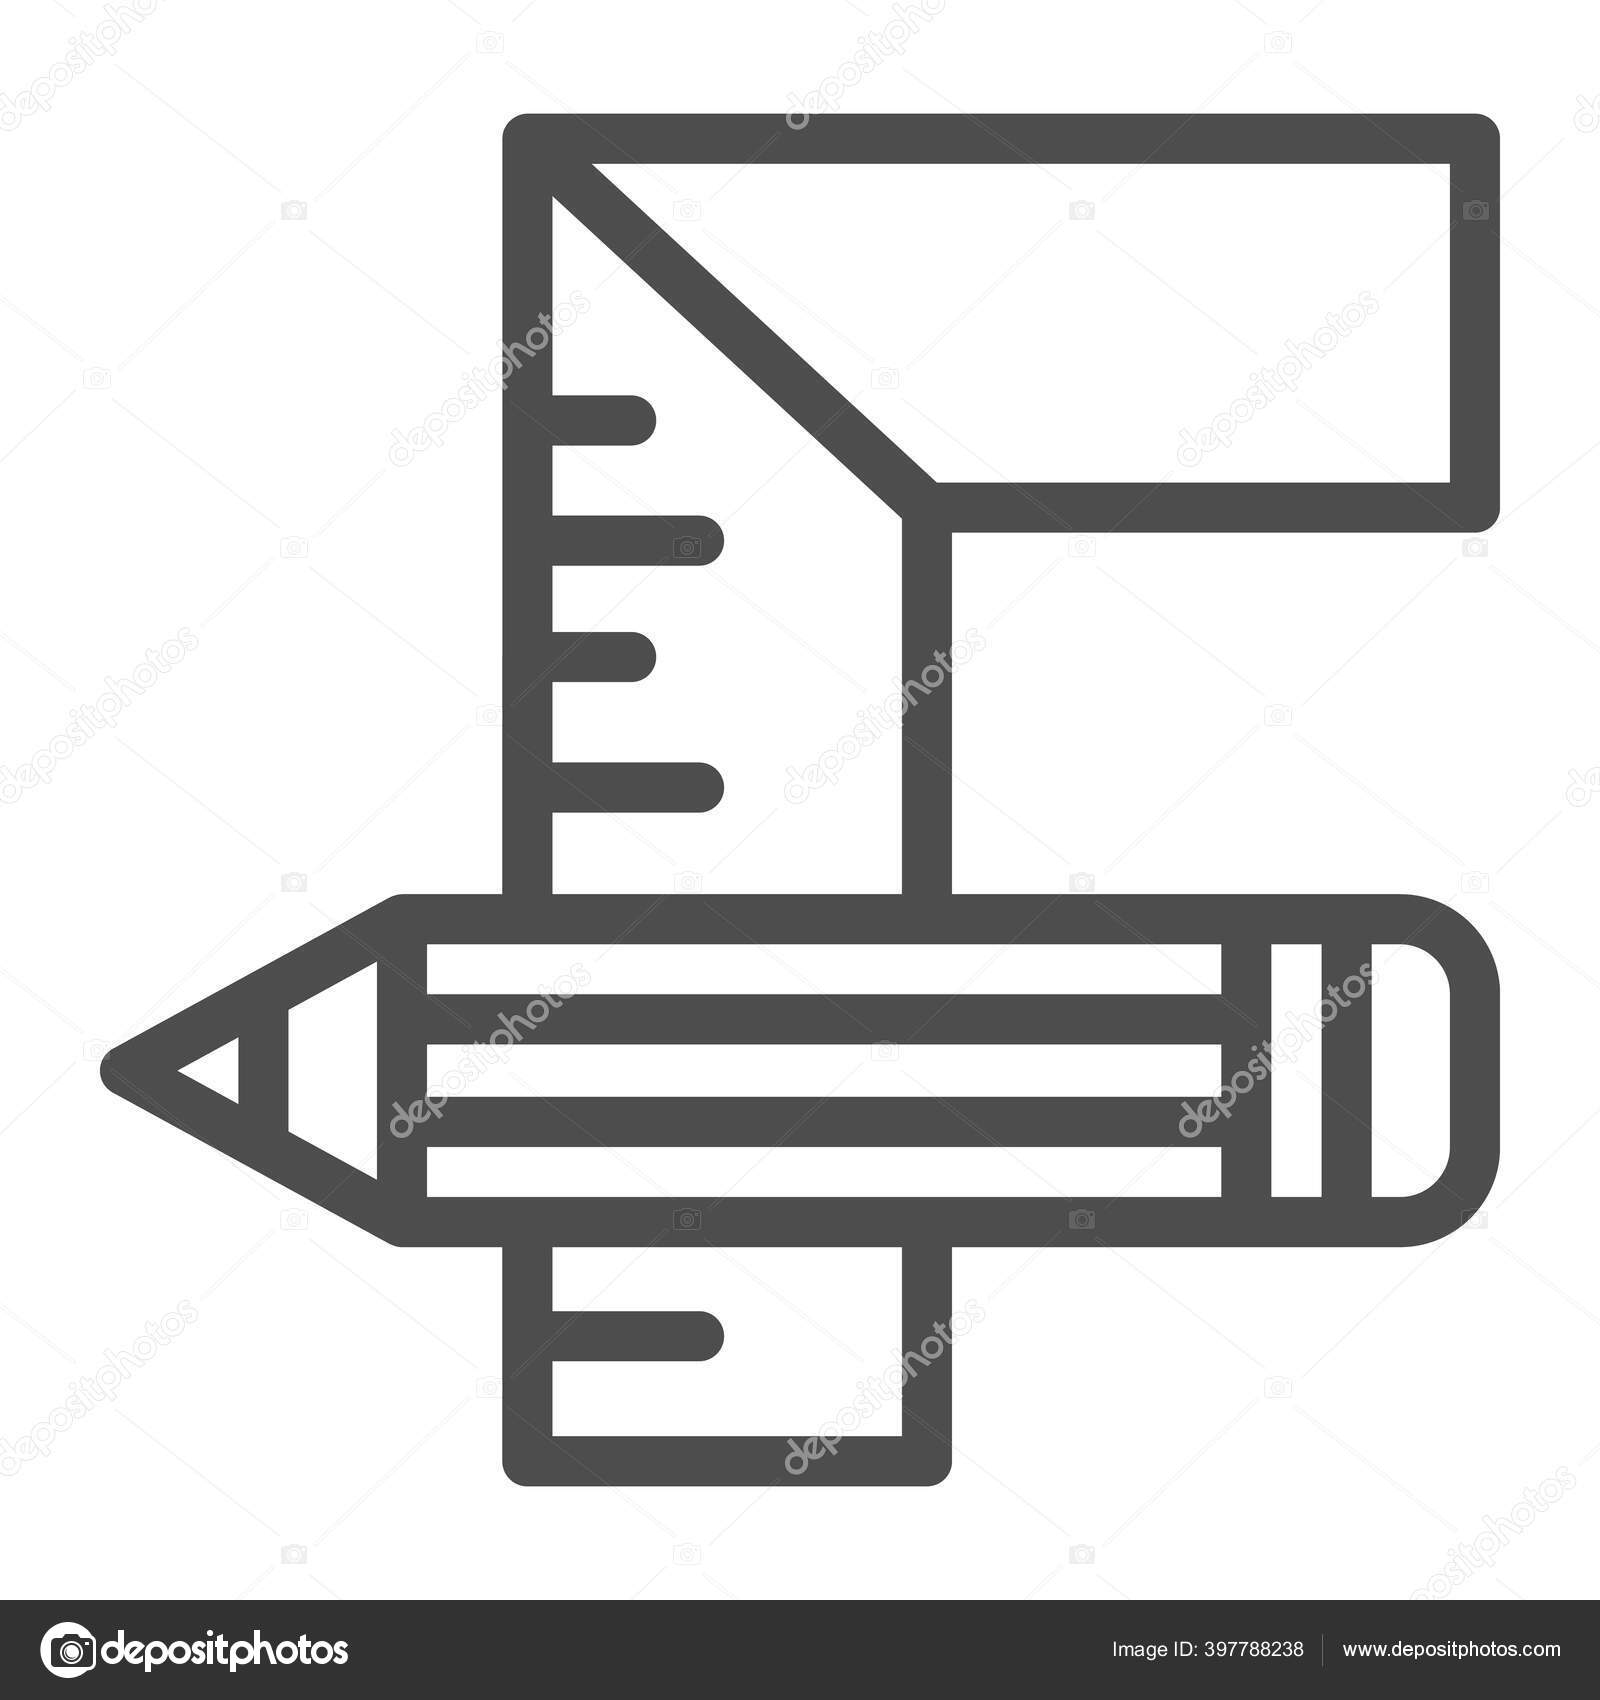 Ruler and Pencil Line Icon. Drawing Math Tools, Classic School